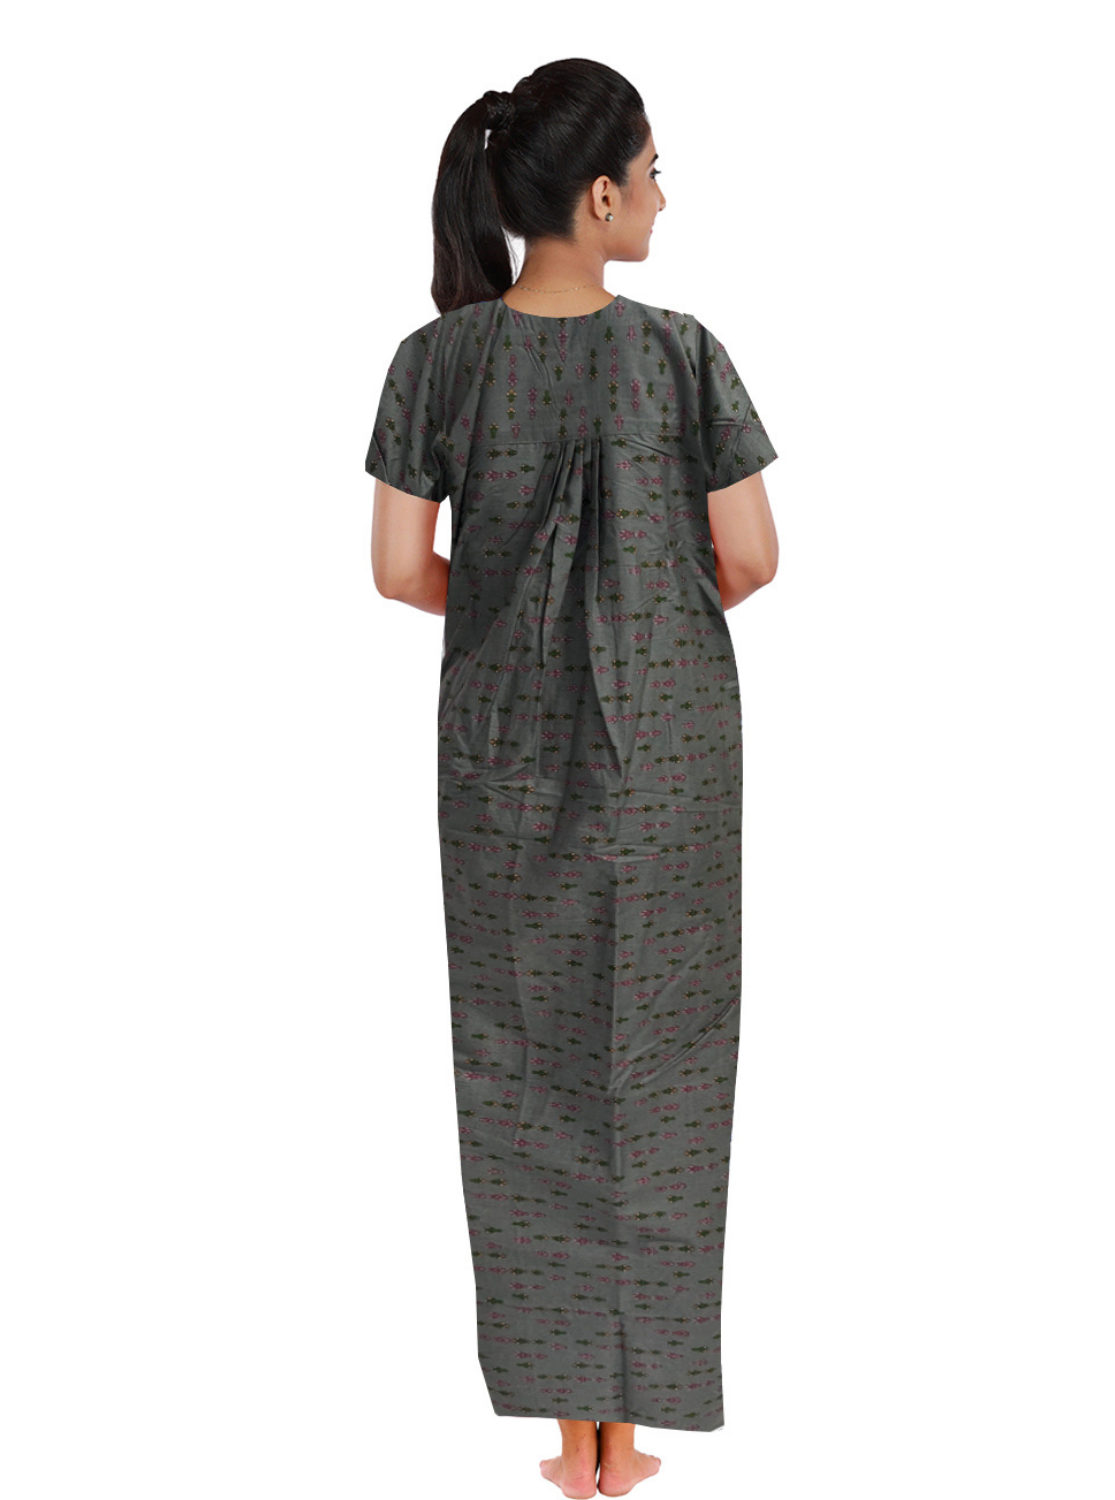 MANGAI New Arrivals Cotton CHUDI CUT Model Nighties - Fancy Neck | With Side Pocket |Shrinkage Free Nighties | Stylish Collection's for Trendy Women's